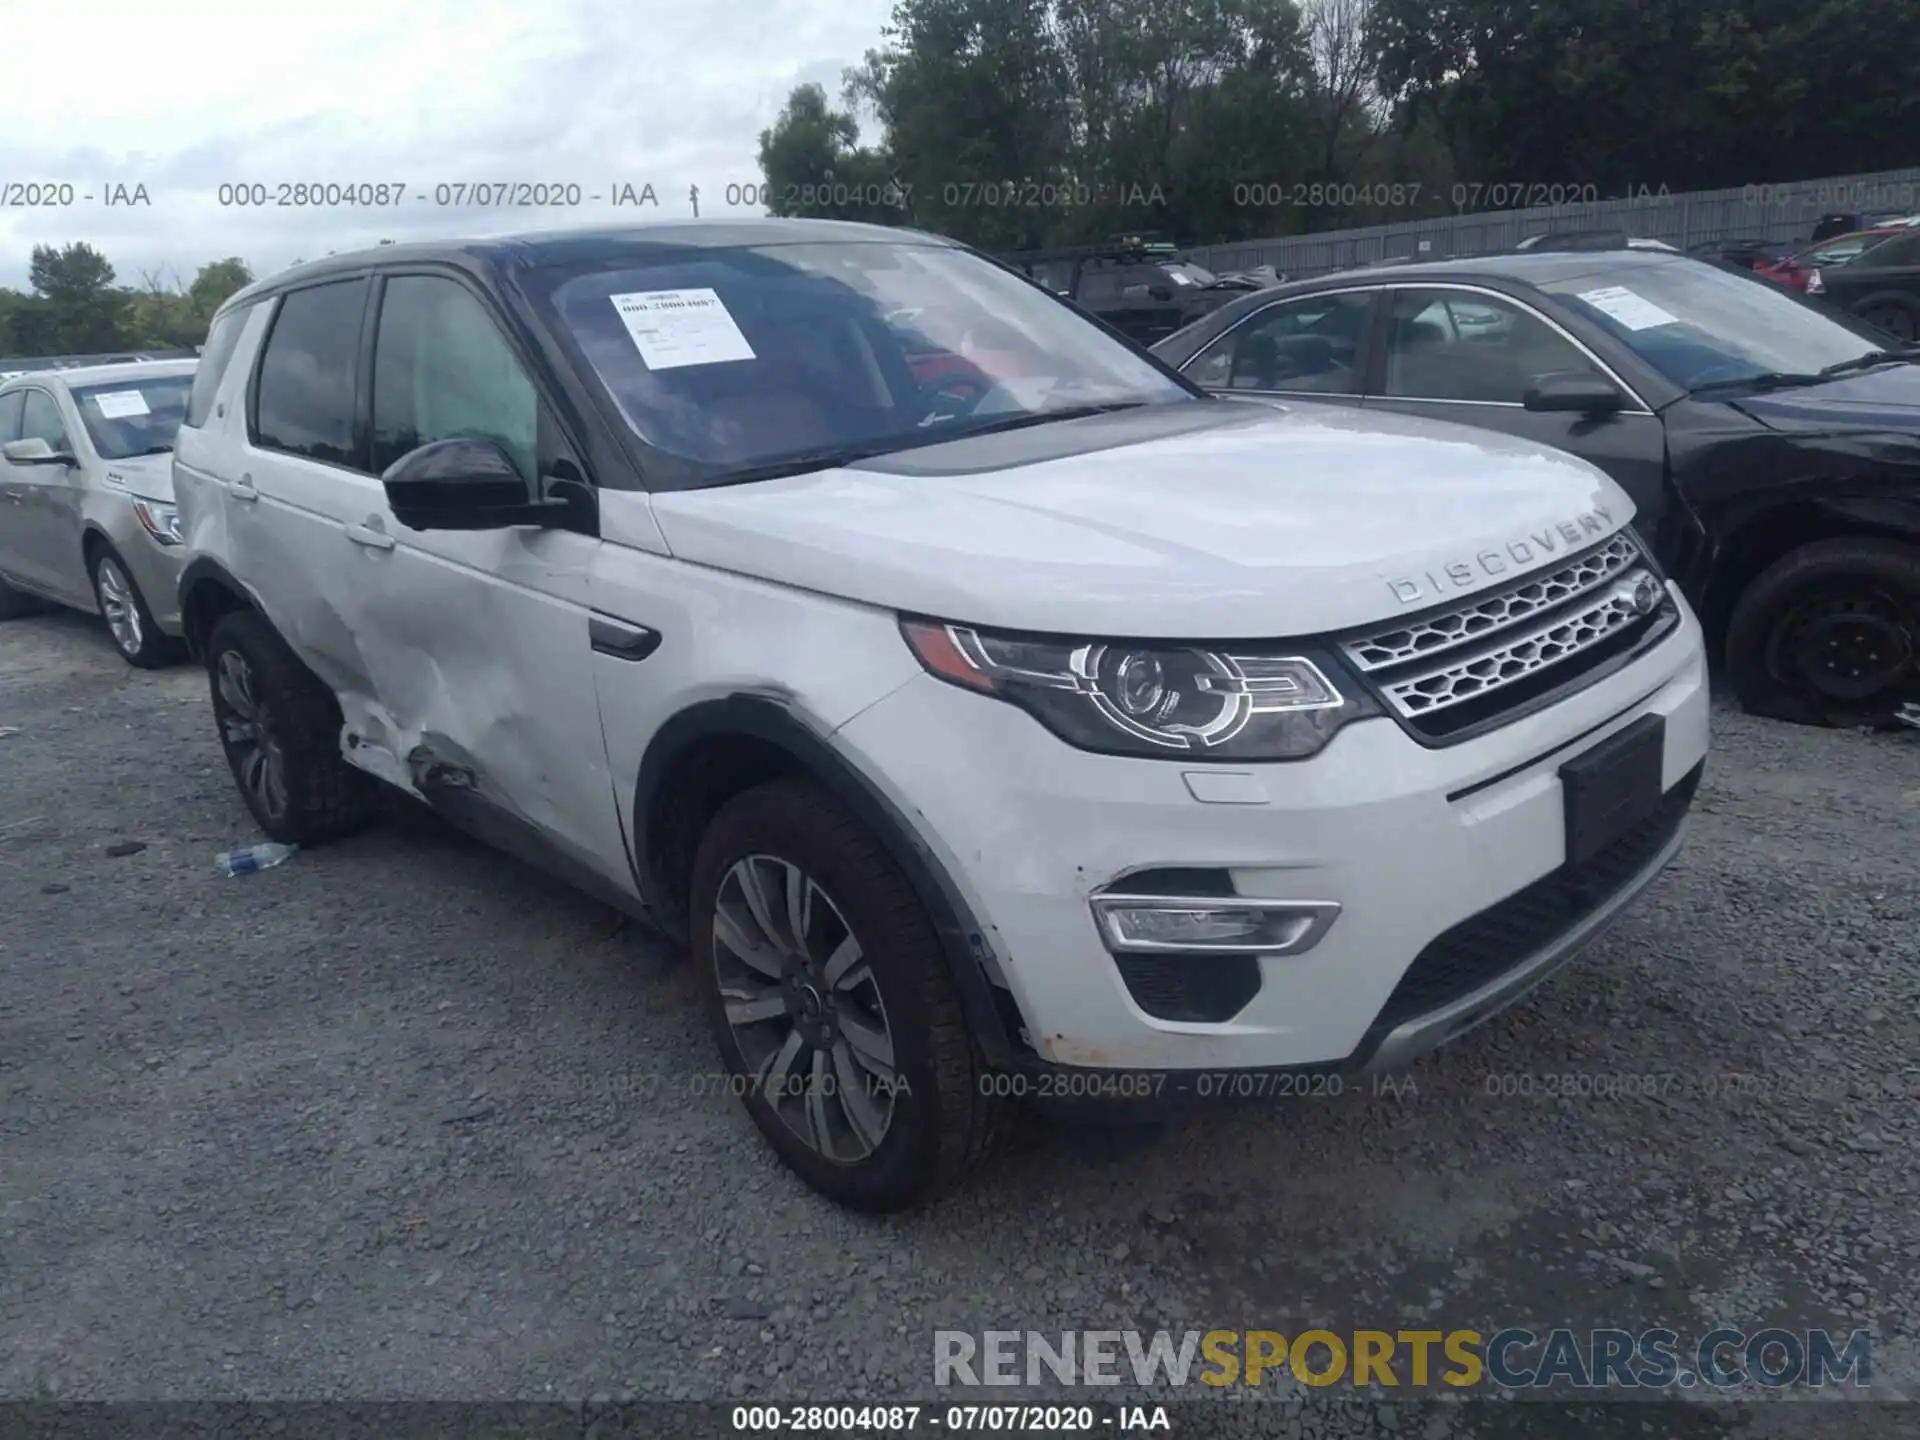 1 Photograph of a damaged car SALCT2FX3KH811339 LAND ROVER DISCOVERY SPORT 2019